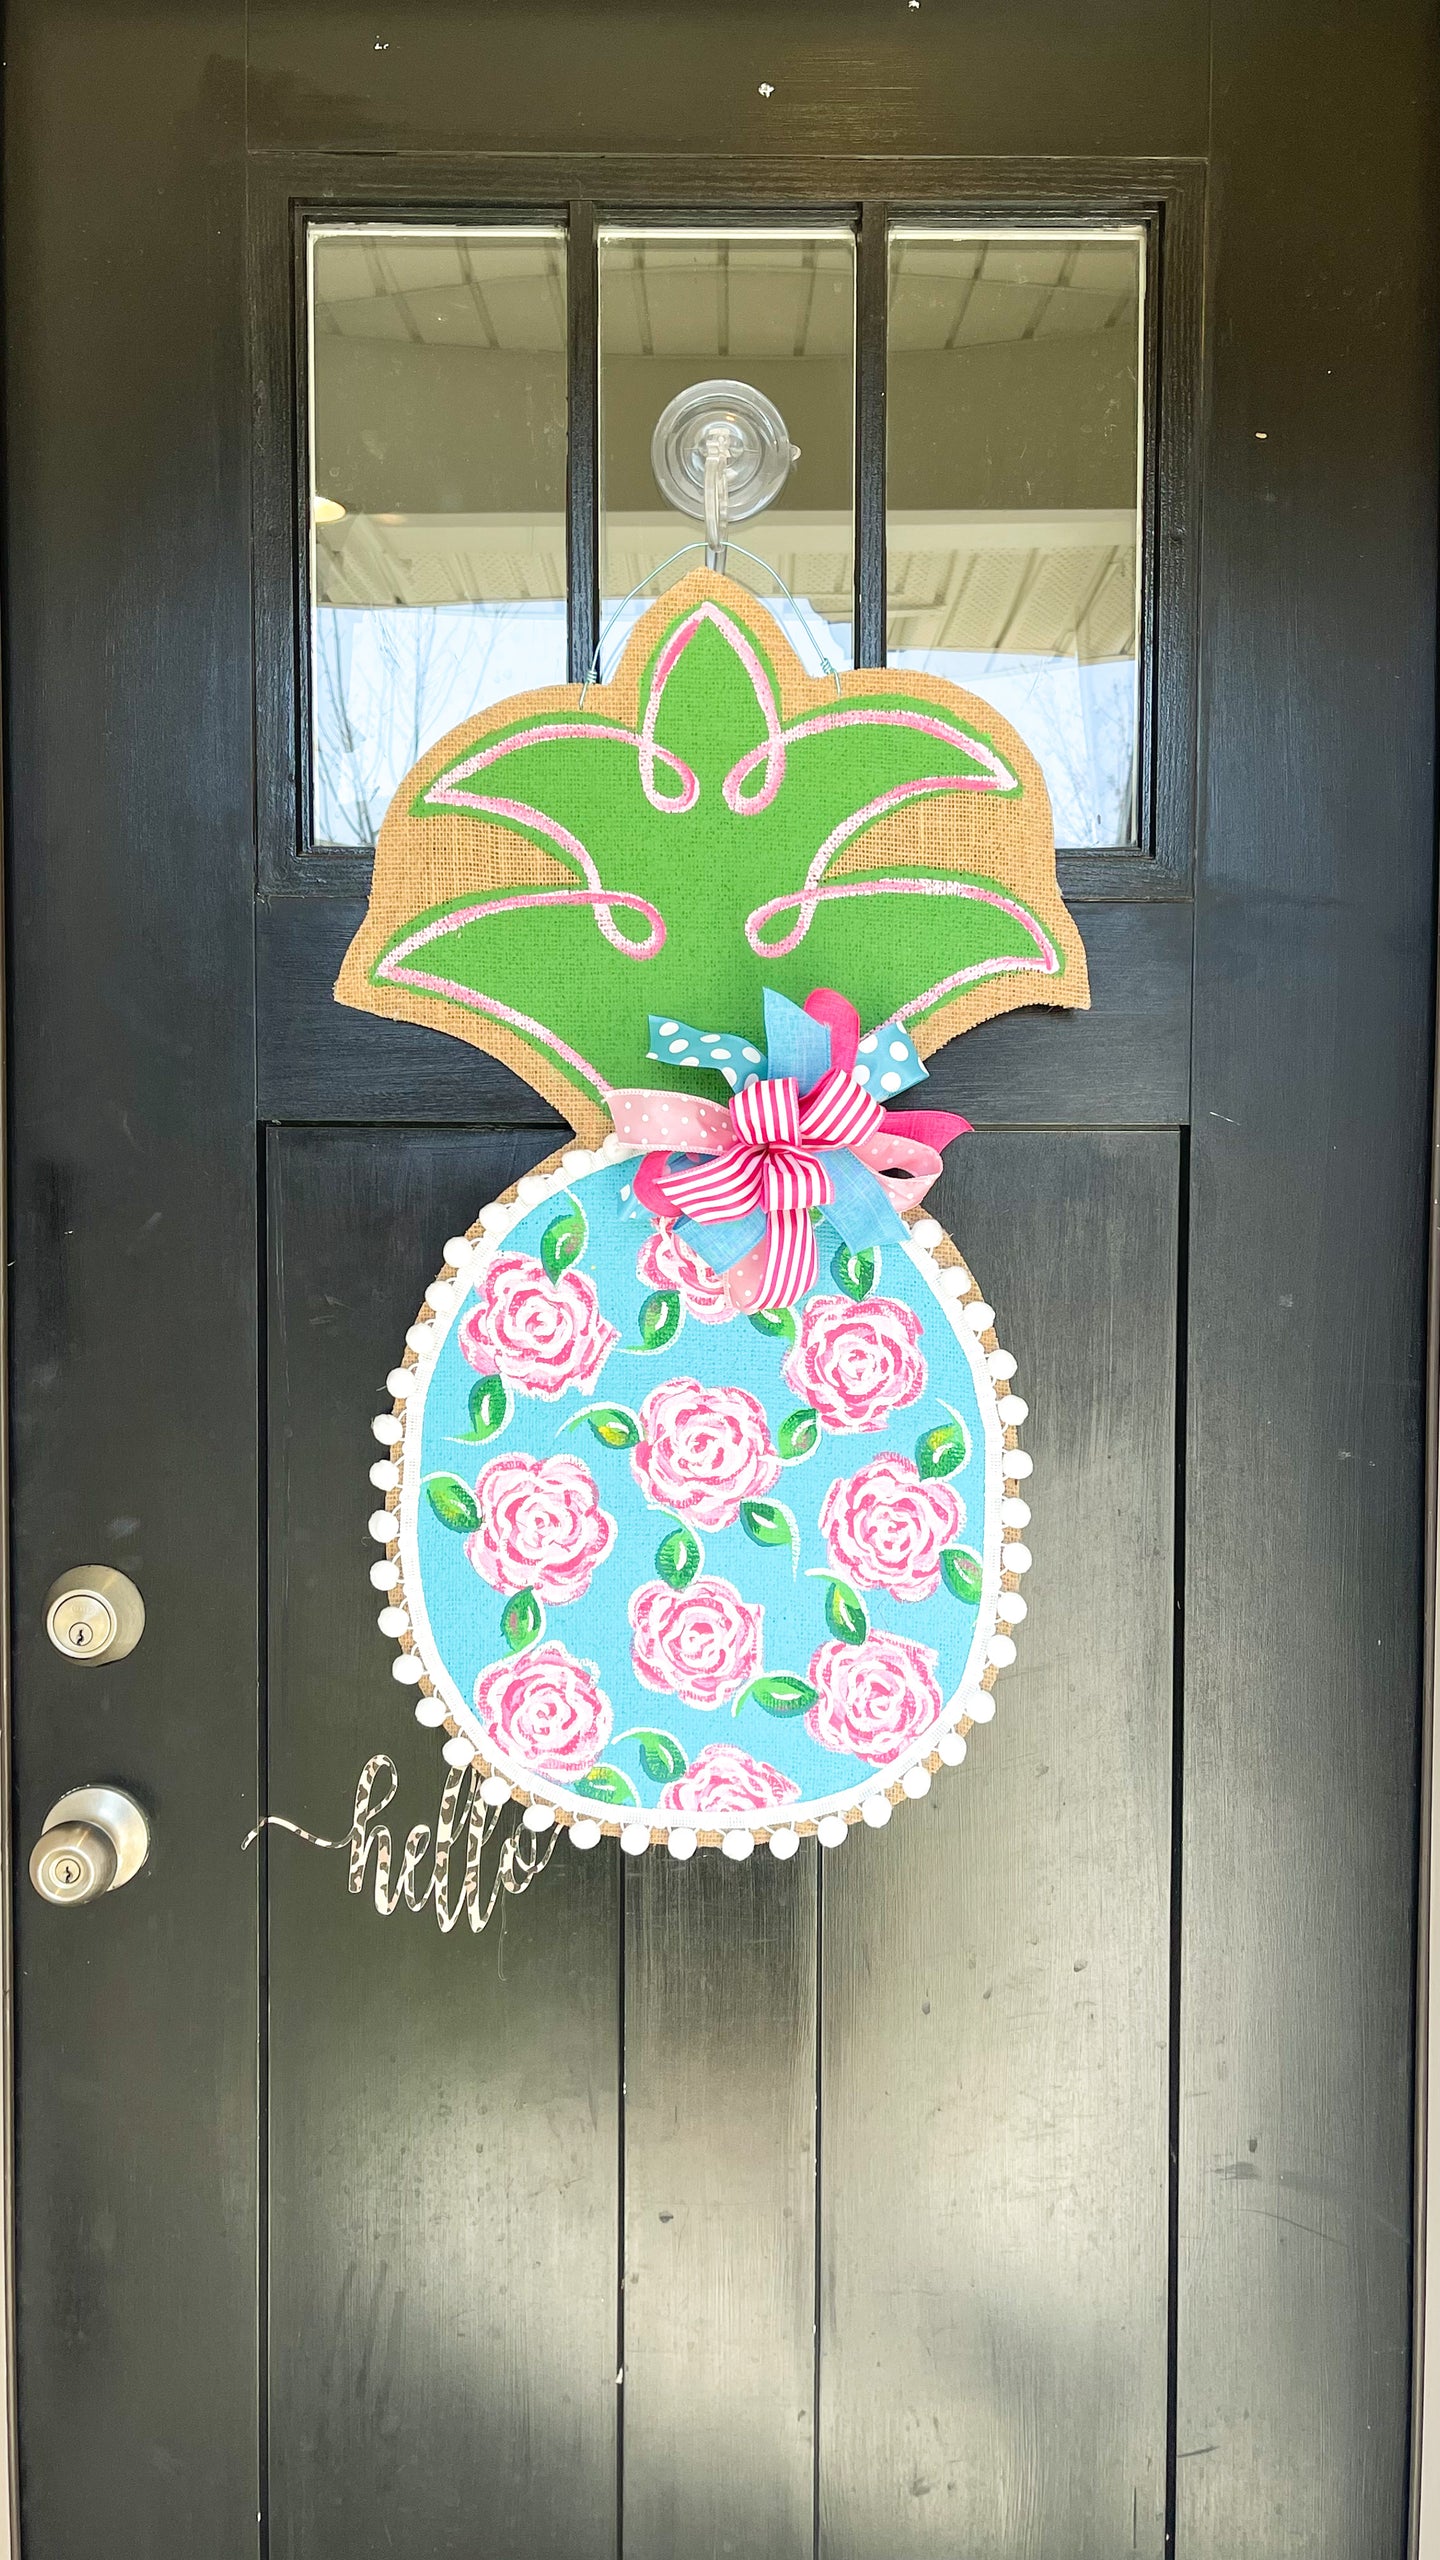 Burlap Pineapple Door Hanger - Lilly First Impressions Inspired Floral (Large/Turquoise & Pink)